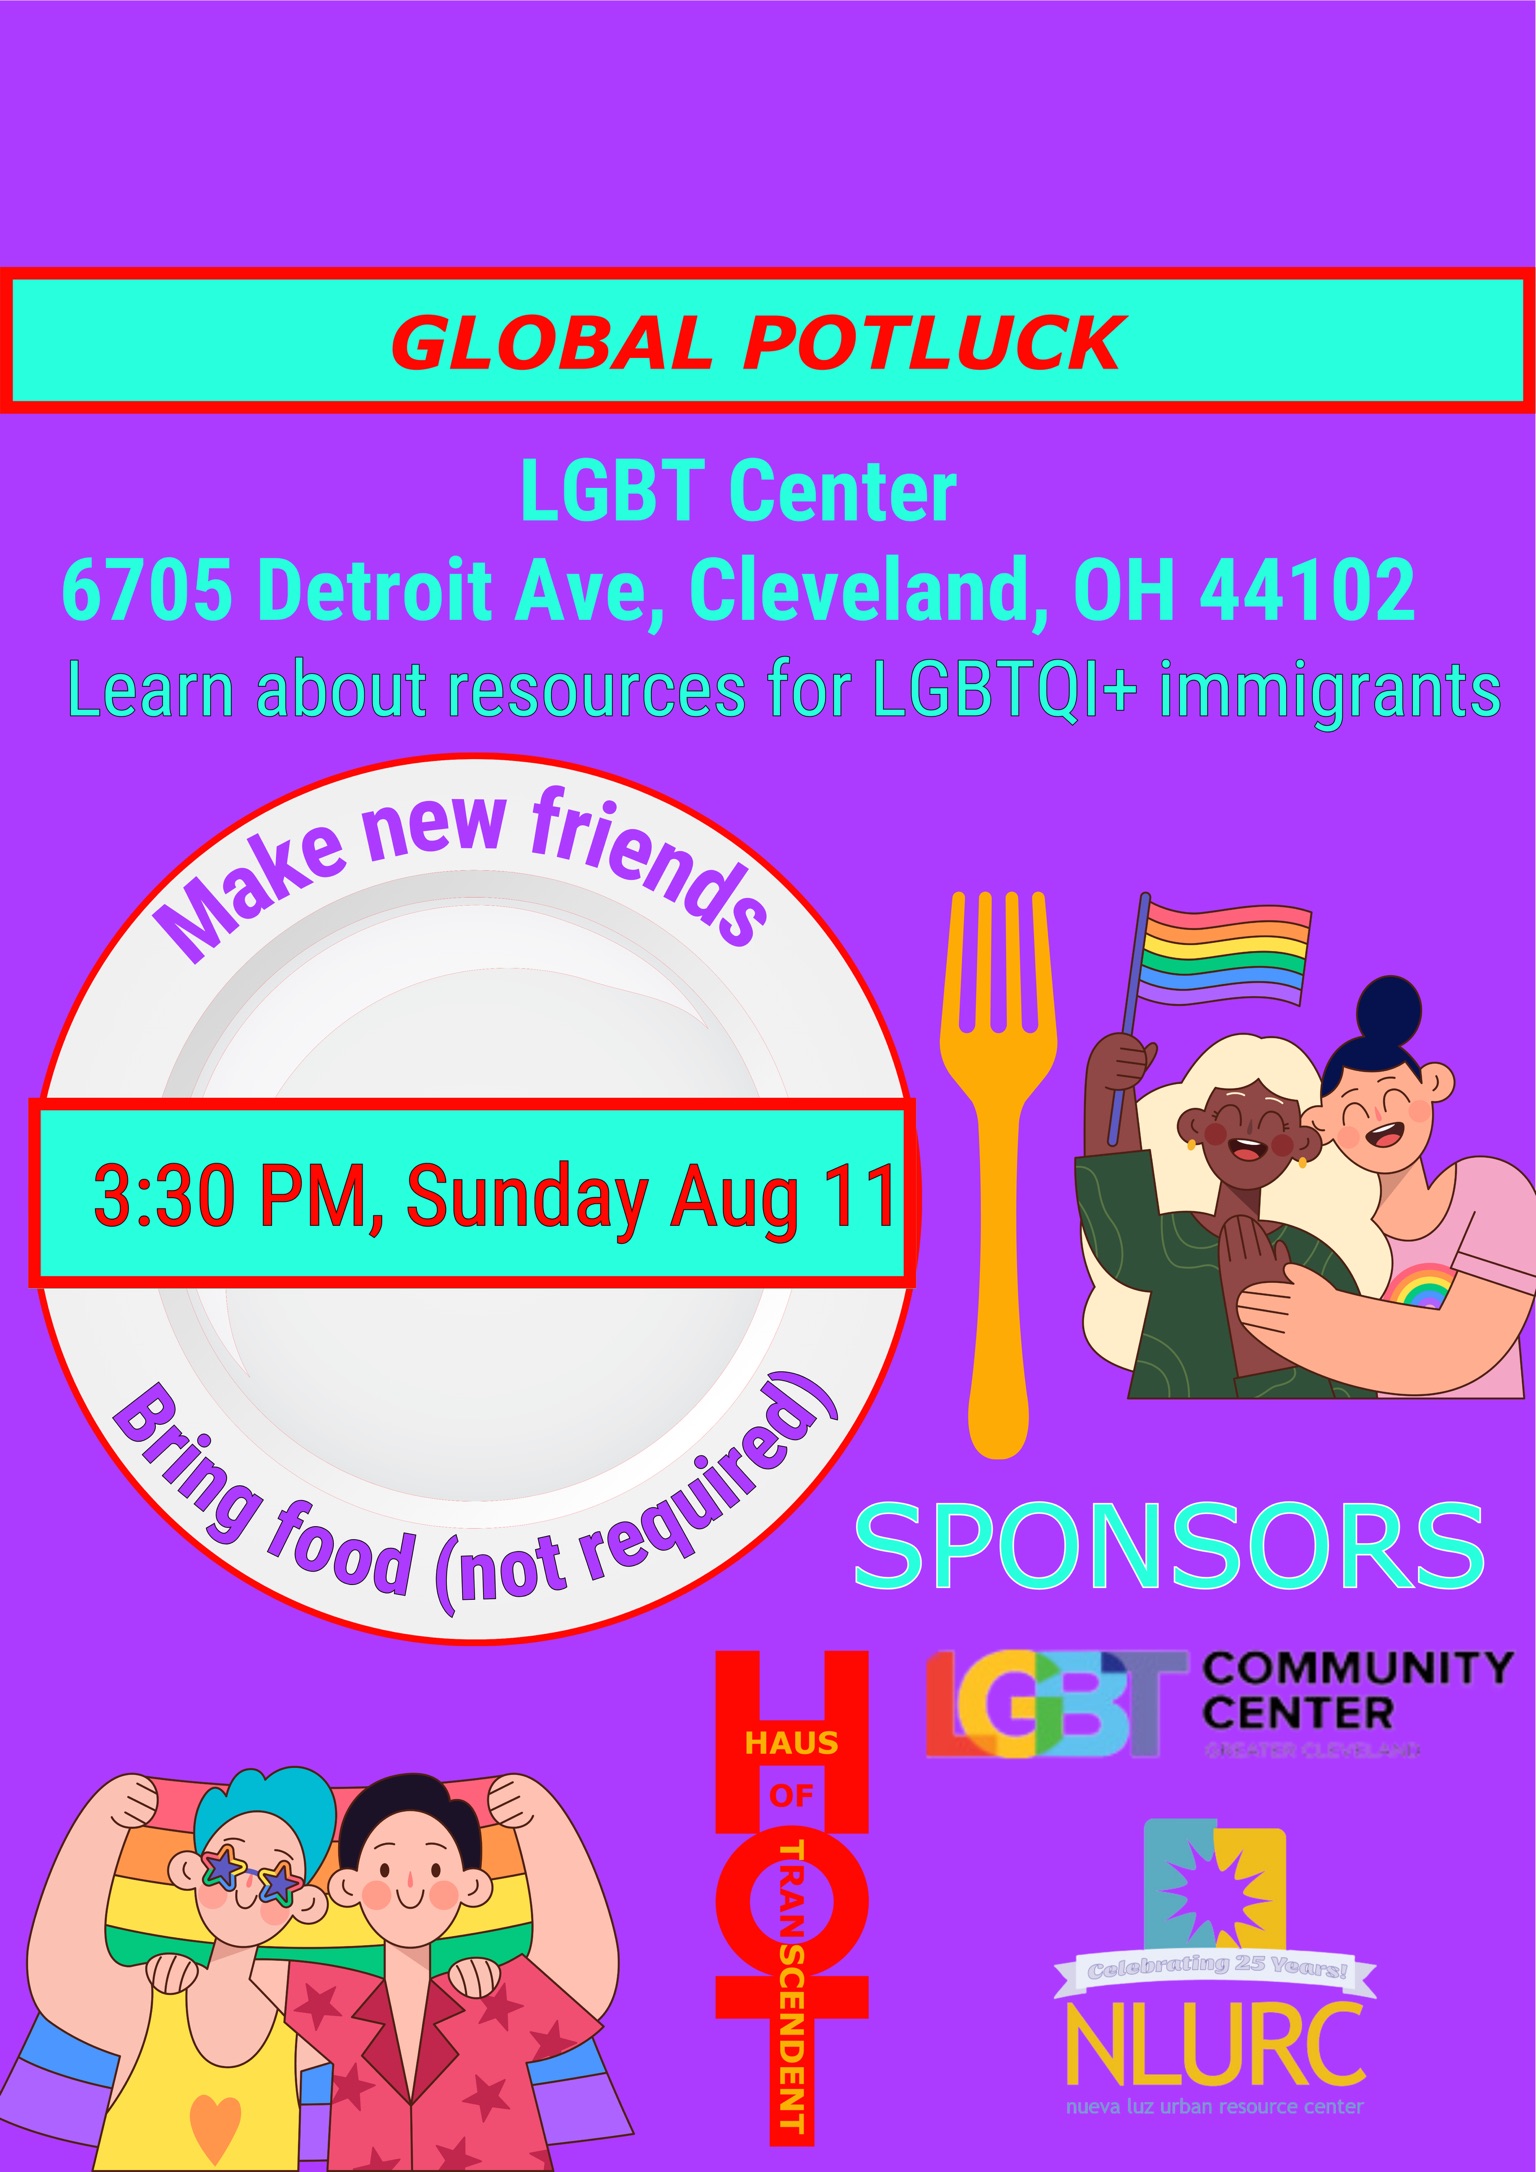 HOT Cleveland poster on a potluck for expats, immigrants, refugees, and more